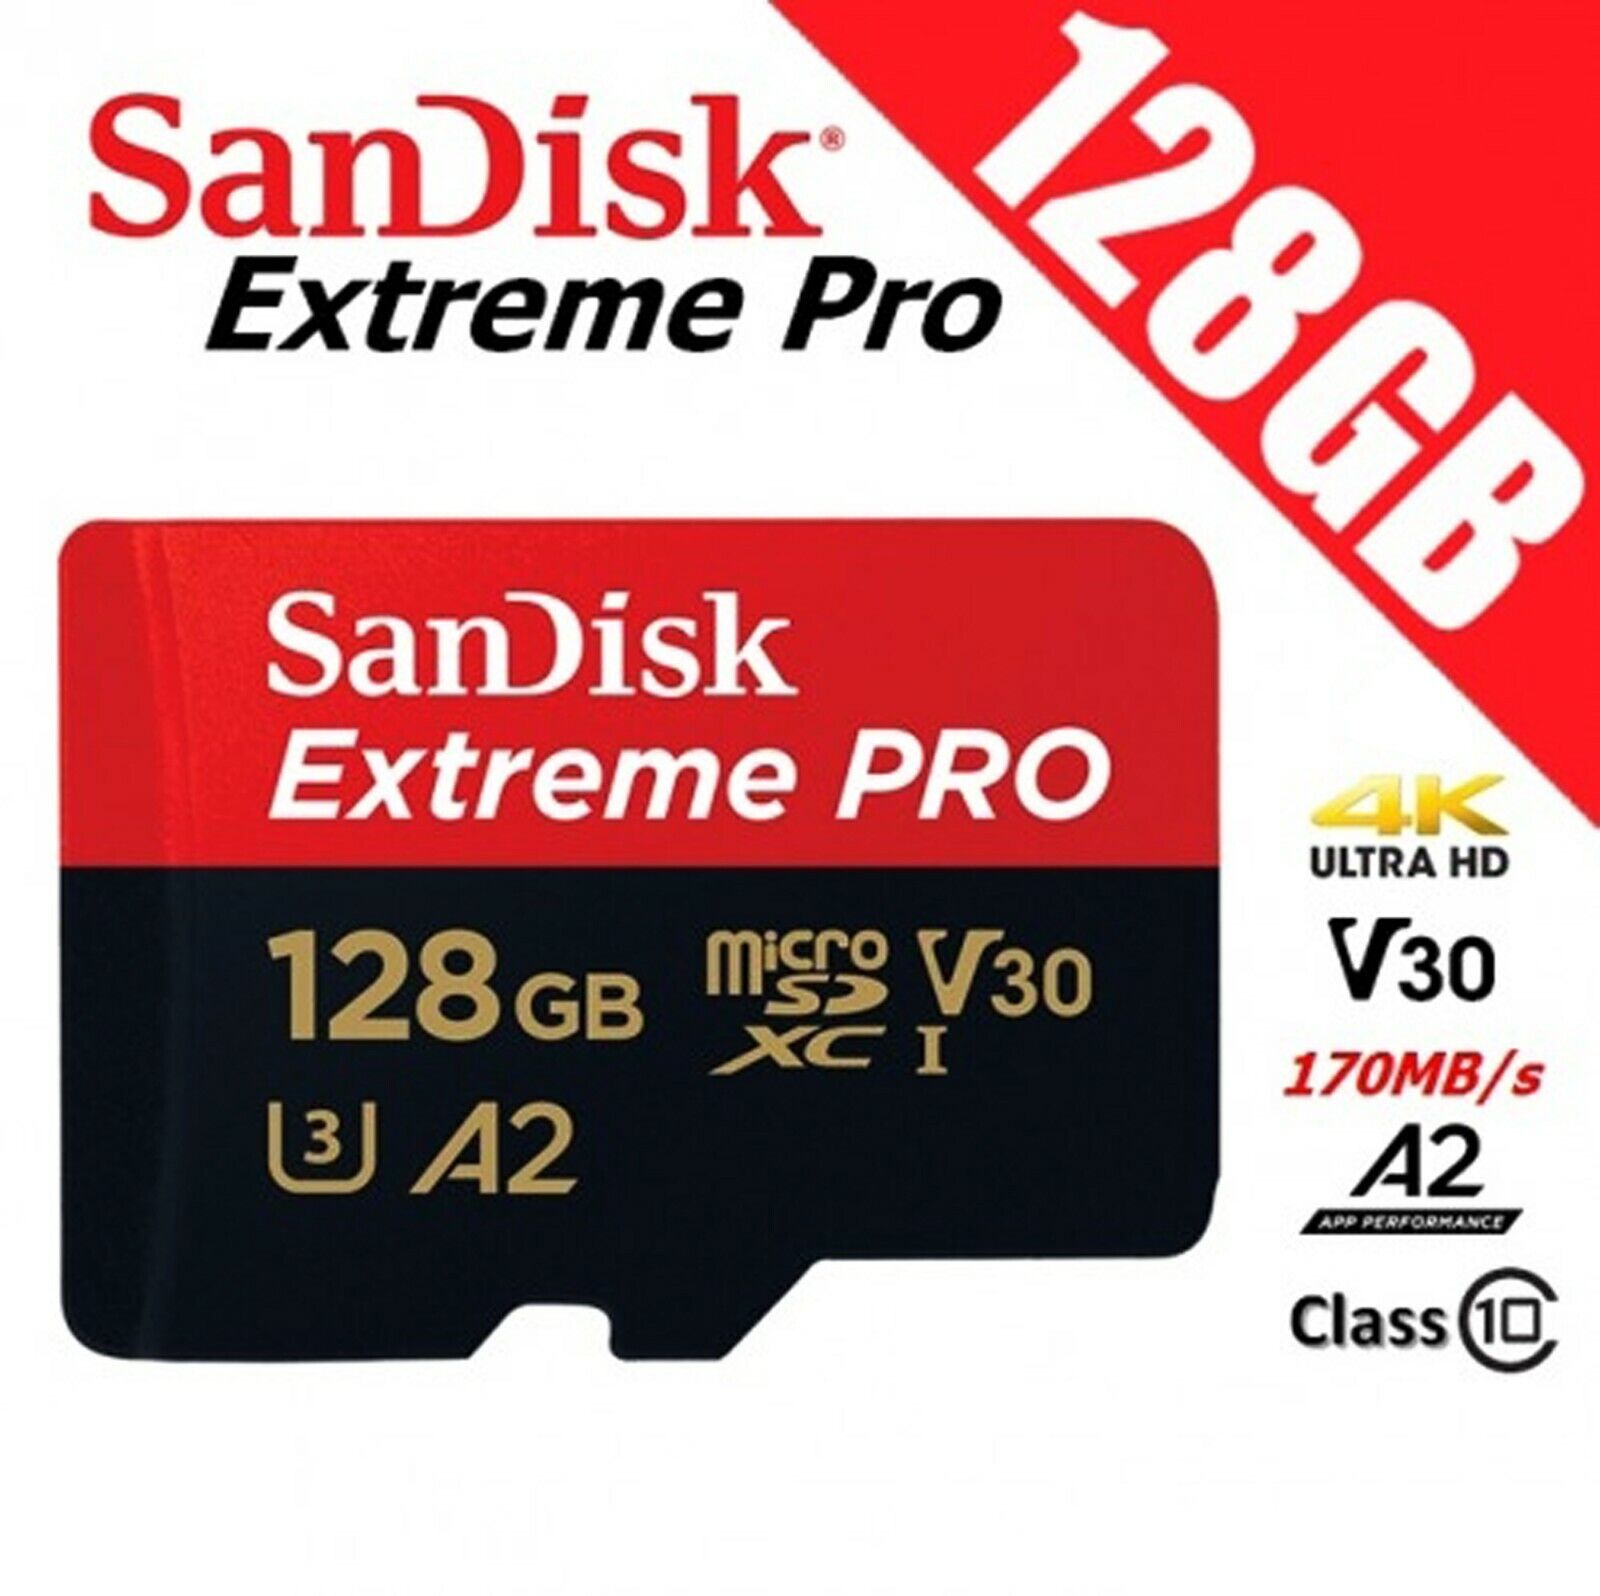 SanDisk 128GB Extreme Pro 170MB/s Micro SD SDXC UHS-I U3 A2 V30 Memory Card New